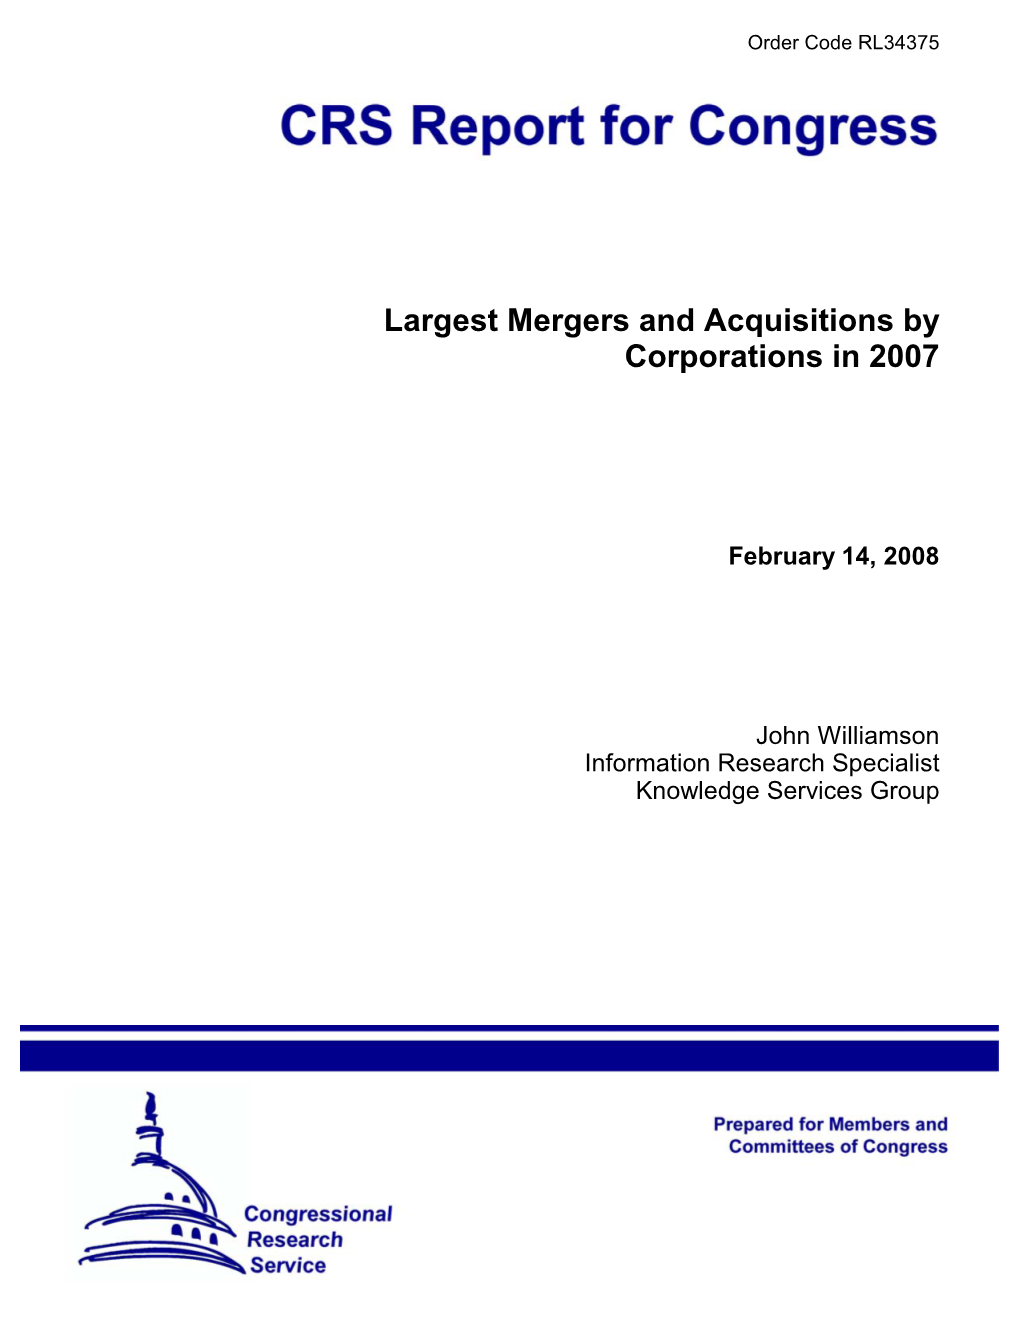 Largest Mergers and Acquisitions by Corporations in 2007